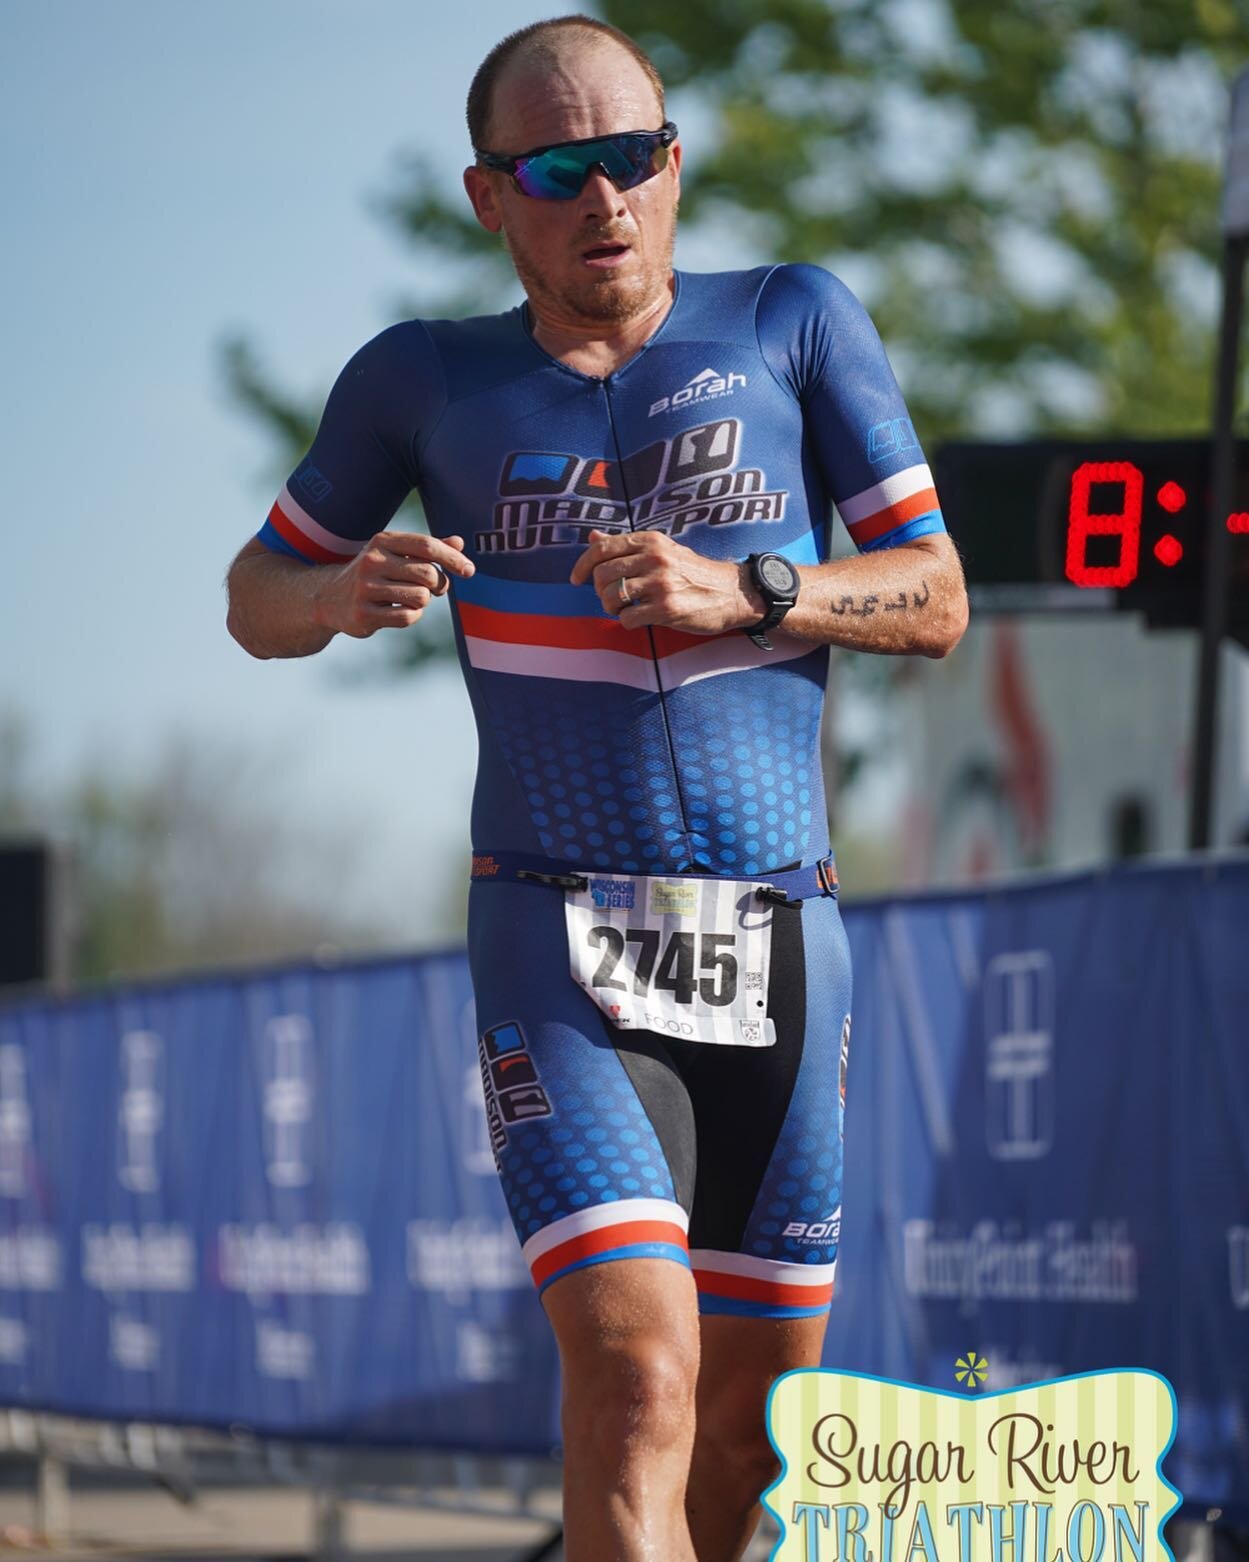 Today Coach Steve got to race at the local Sugar River Sprint Triathlon. From starting the year not being able to run to being able to run and compete with no pain, it&rsquo;s been a great year getting back into it. Thanks @focalflame for the great p